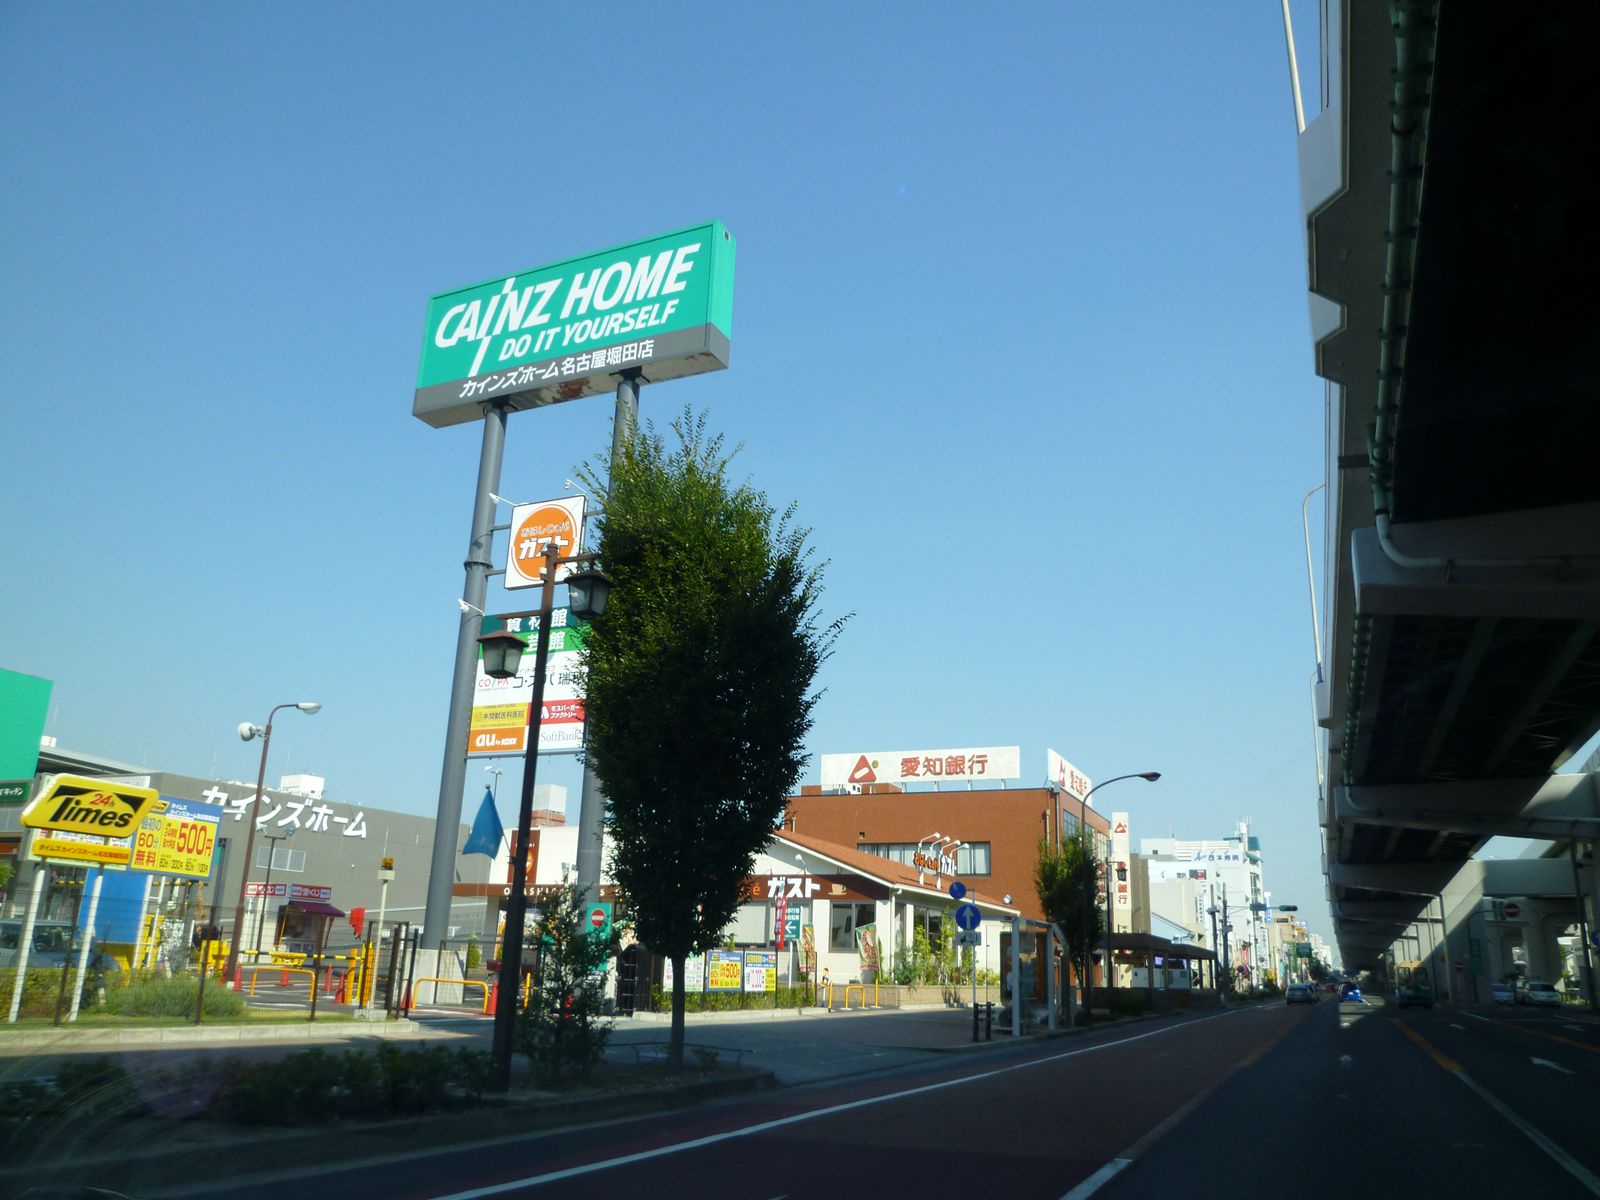 Home center. Cain home Nagoya Hotta store up (home improvement) 640m